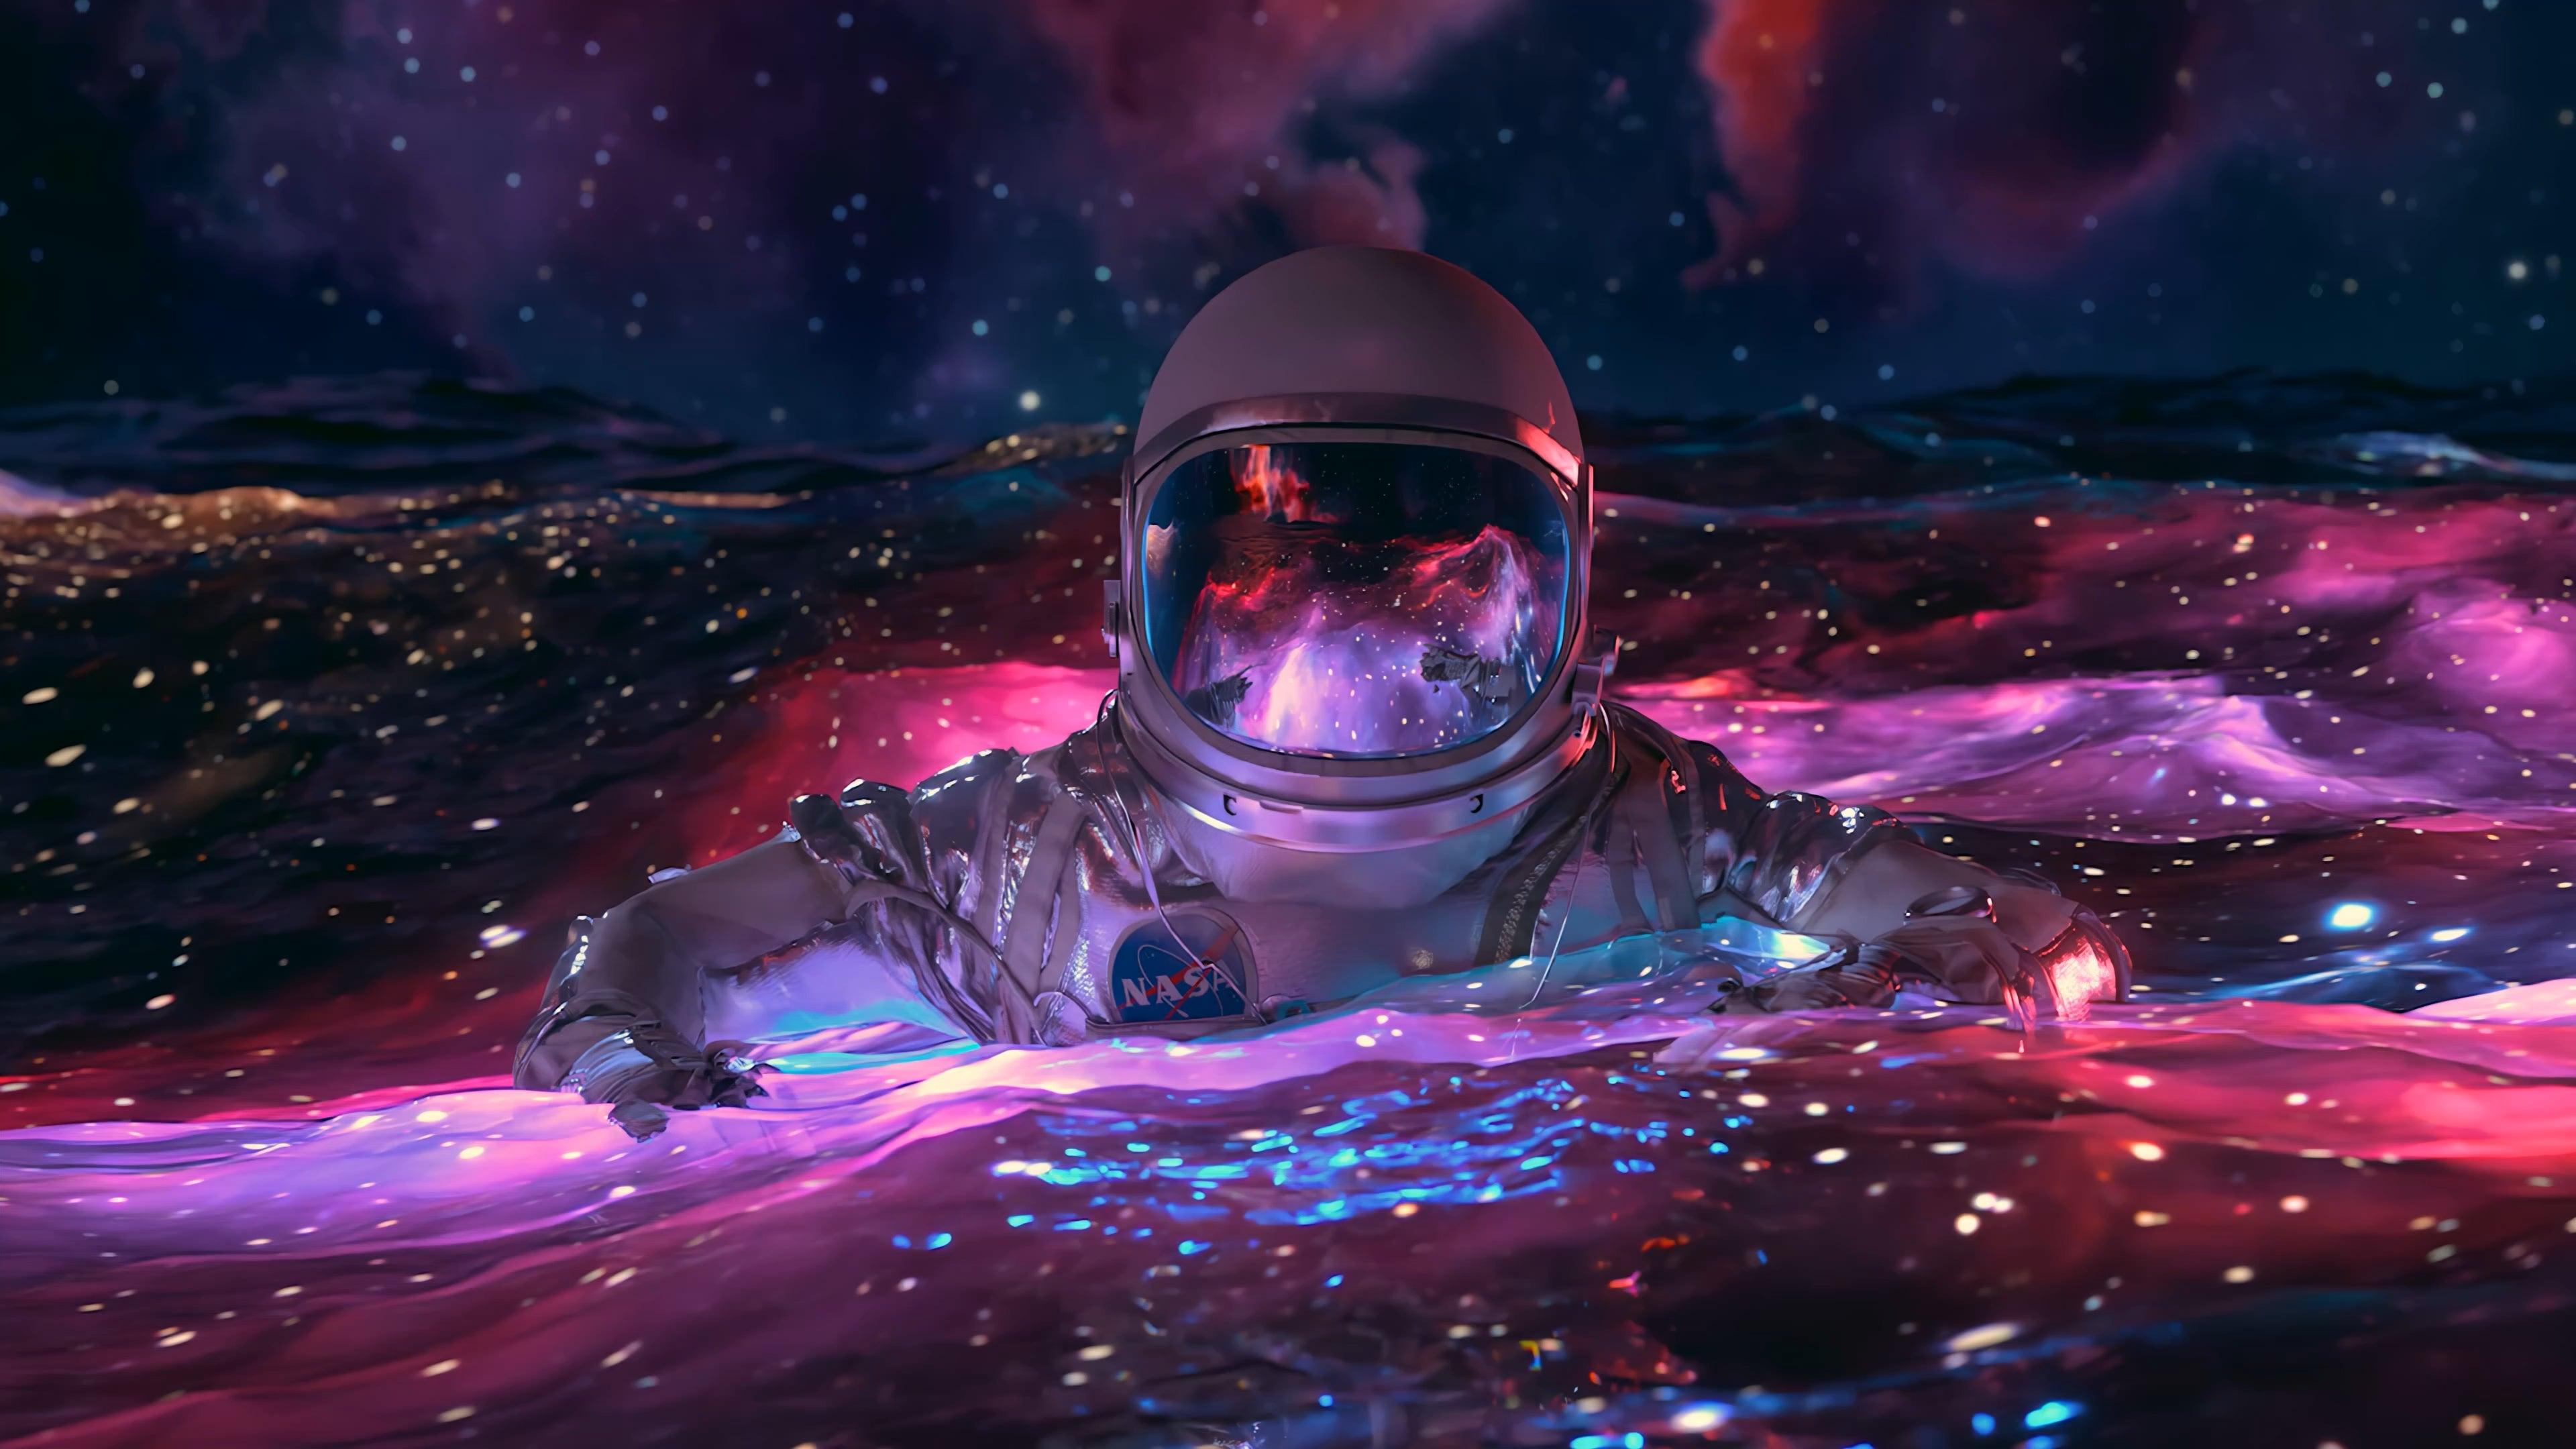 Beautiful Space 3D Free Live Wallpaper for Windows